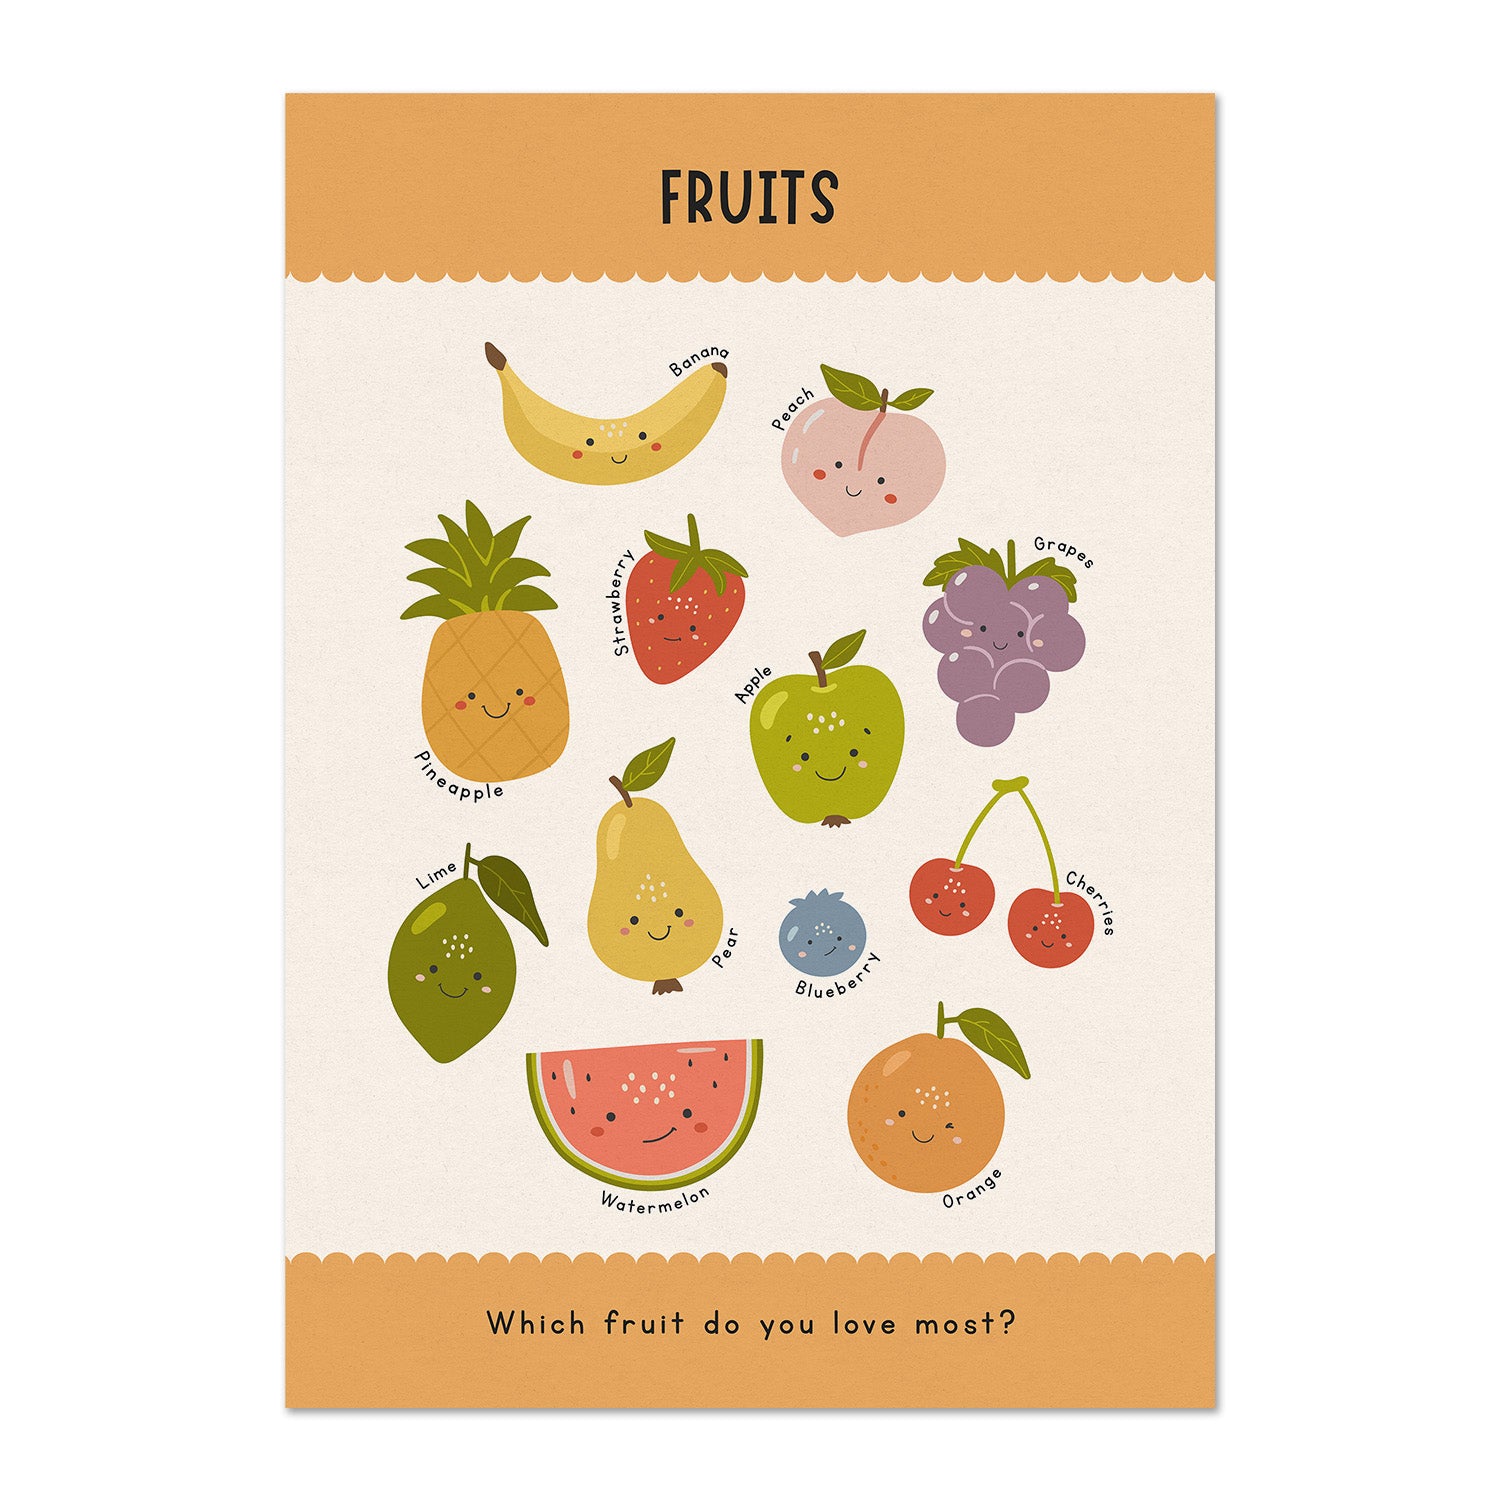 Learning Fruits and Names